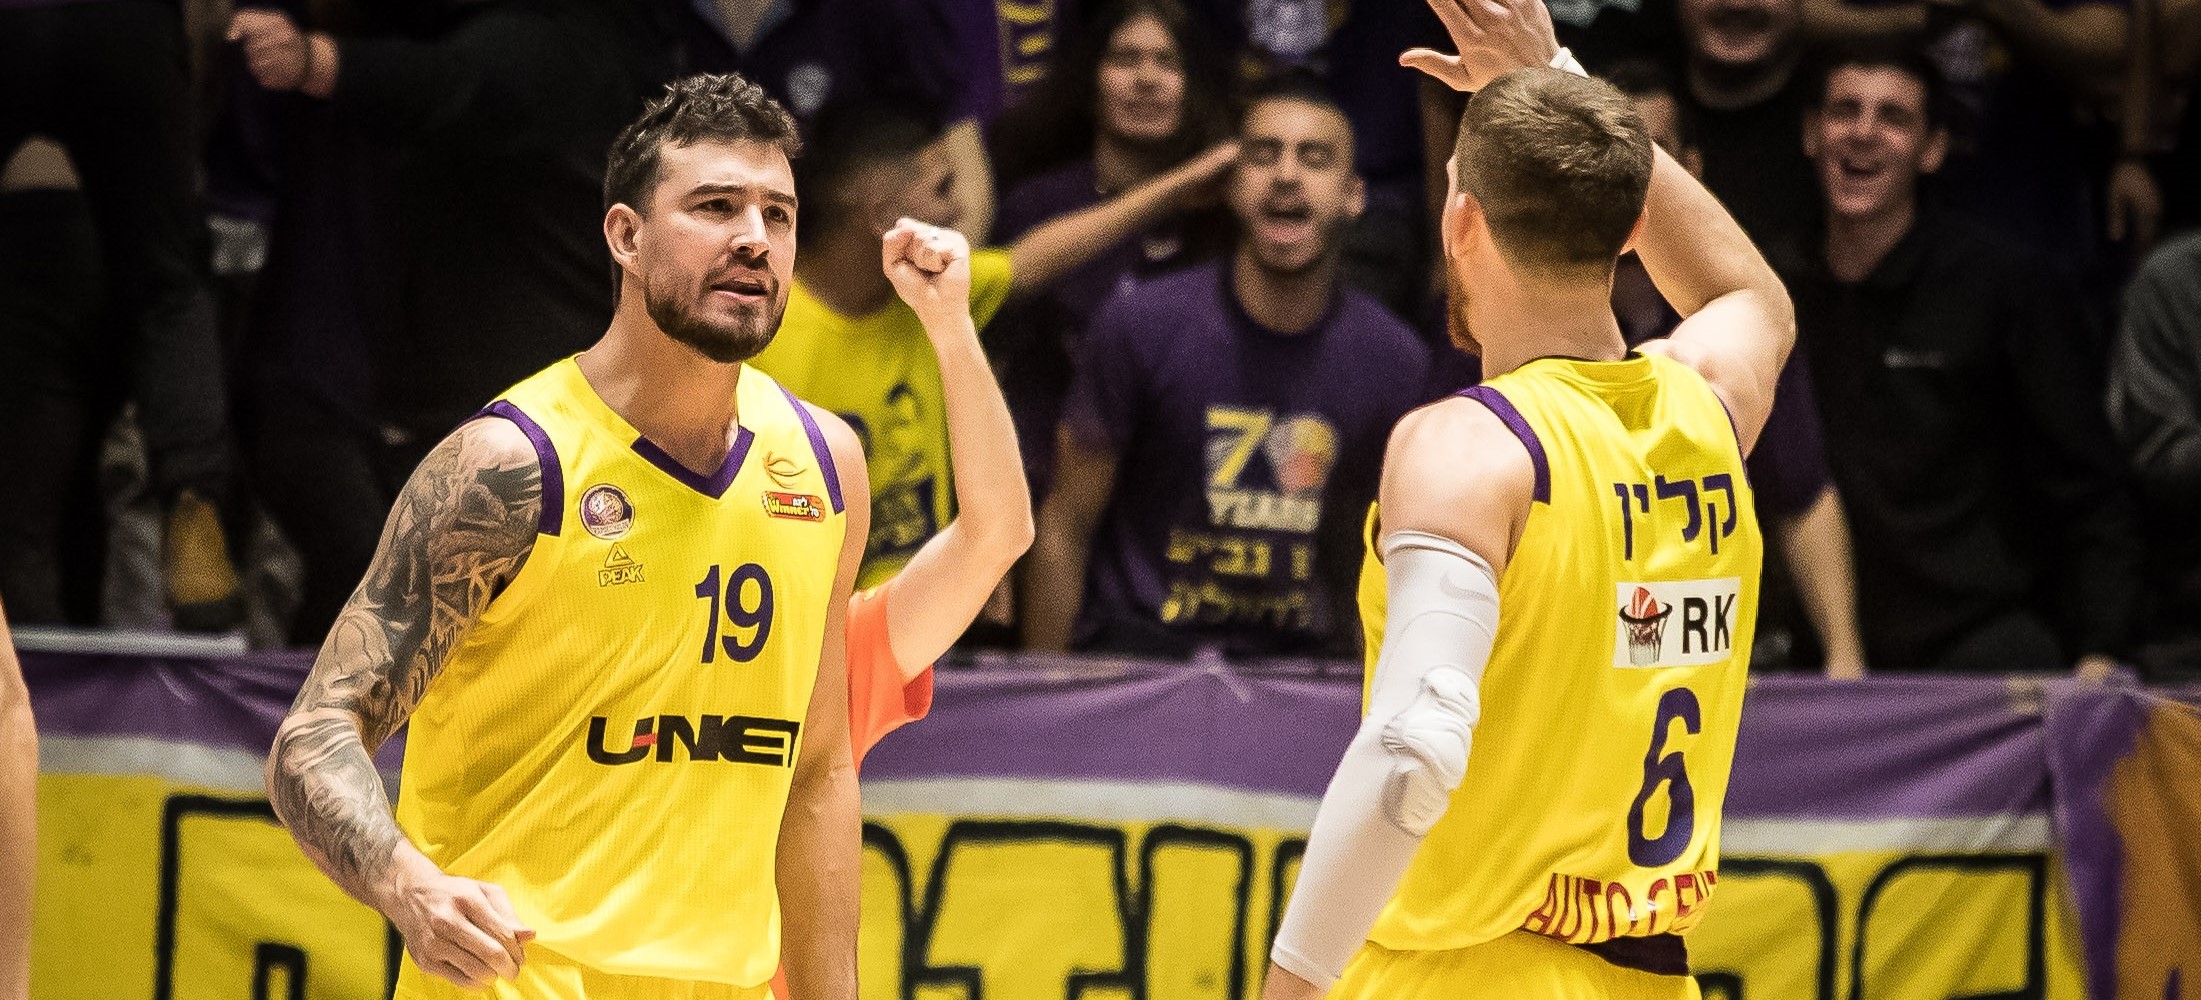 “We’re turning a new page in this season and expectations as a team” Joe Alexander returns to Israel and helps Holon defeat Nahariya 86-78! What else did the big man say? Coach Dedas, Defense, Marcus Foster & More!